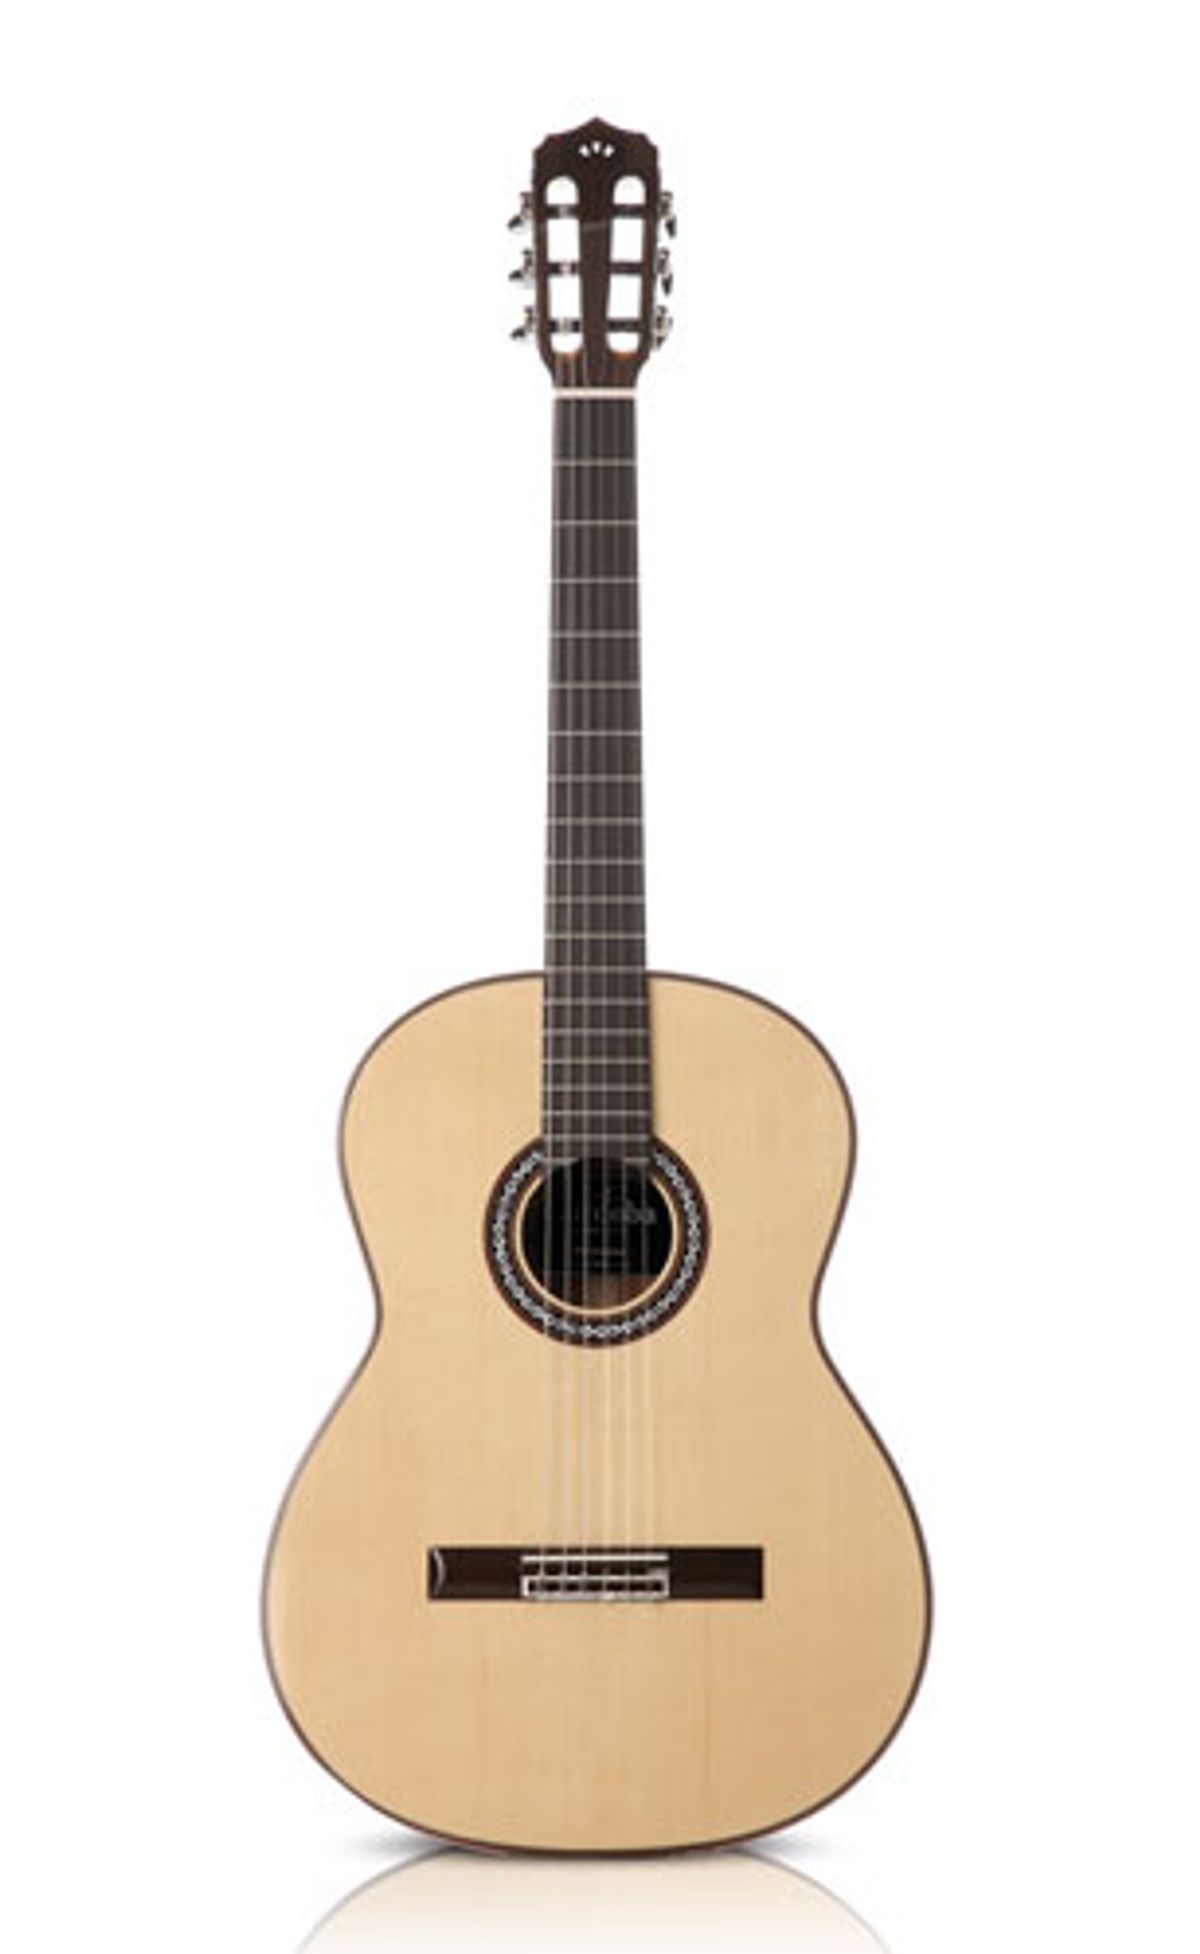 Cordoba Guitars Introduces Steel-String Models, New Parlor Guitars, and Updated Crossover Series